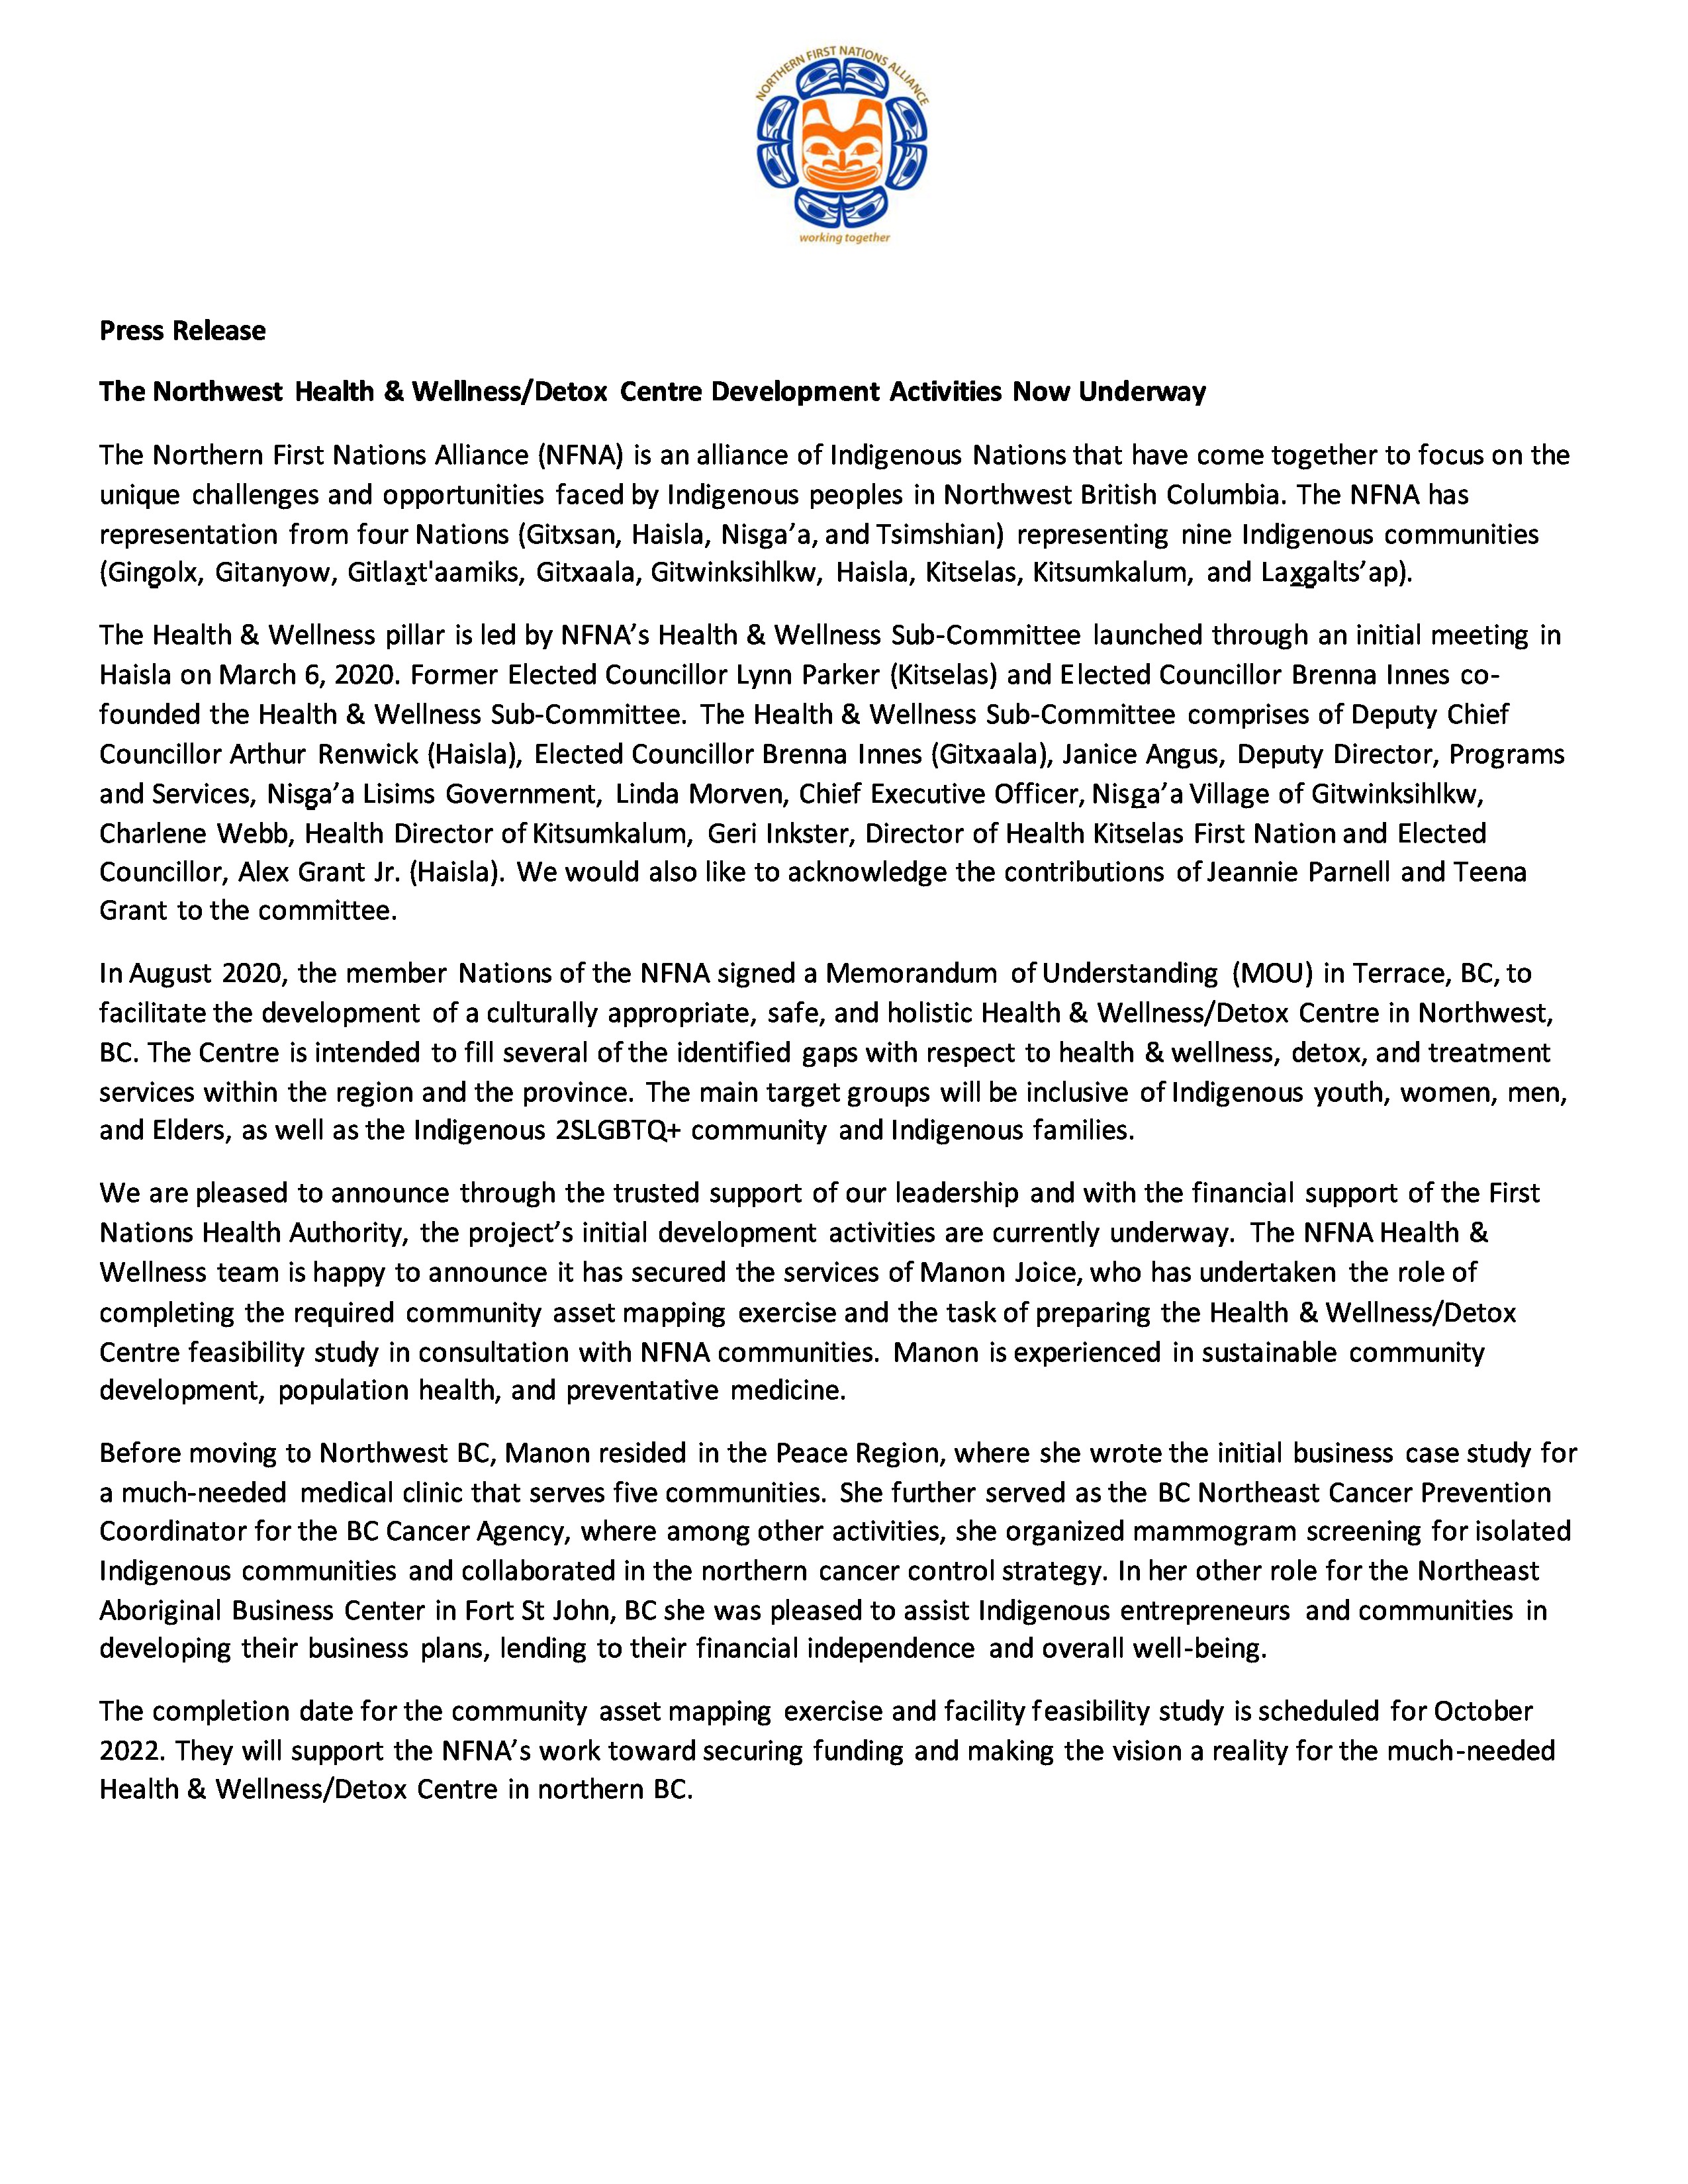 NFNA Press Release - March 10, 2022